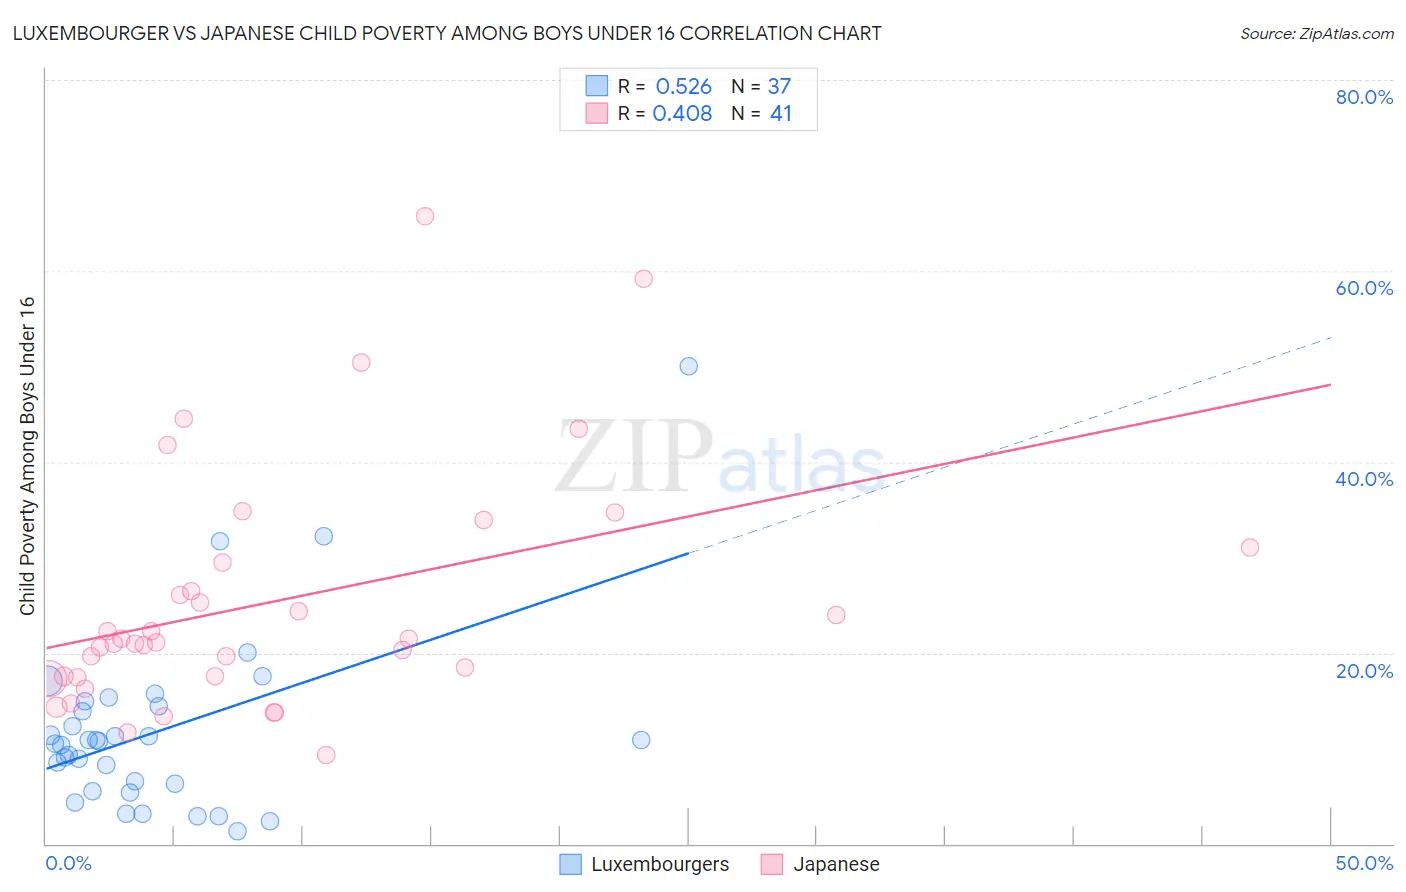 Luxembourger vs Japanese Child Poverty Among Boys Under 16